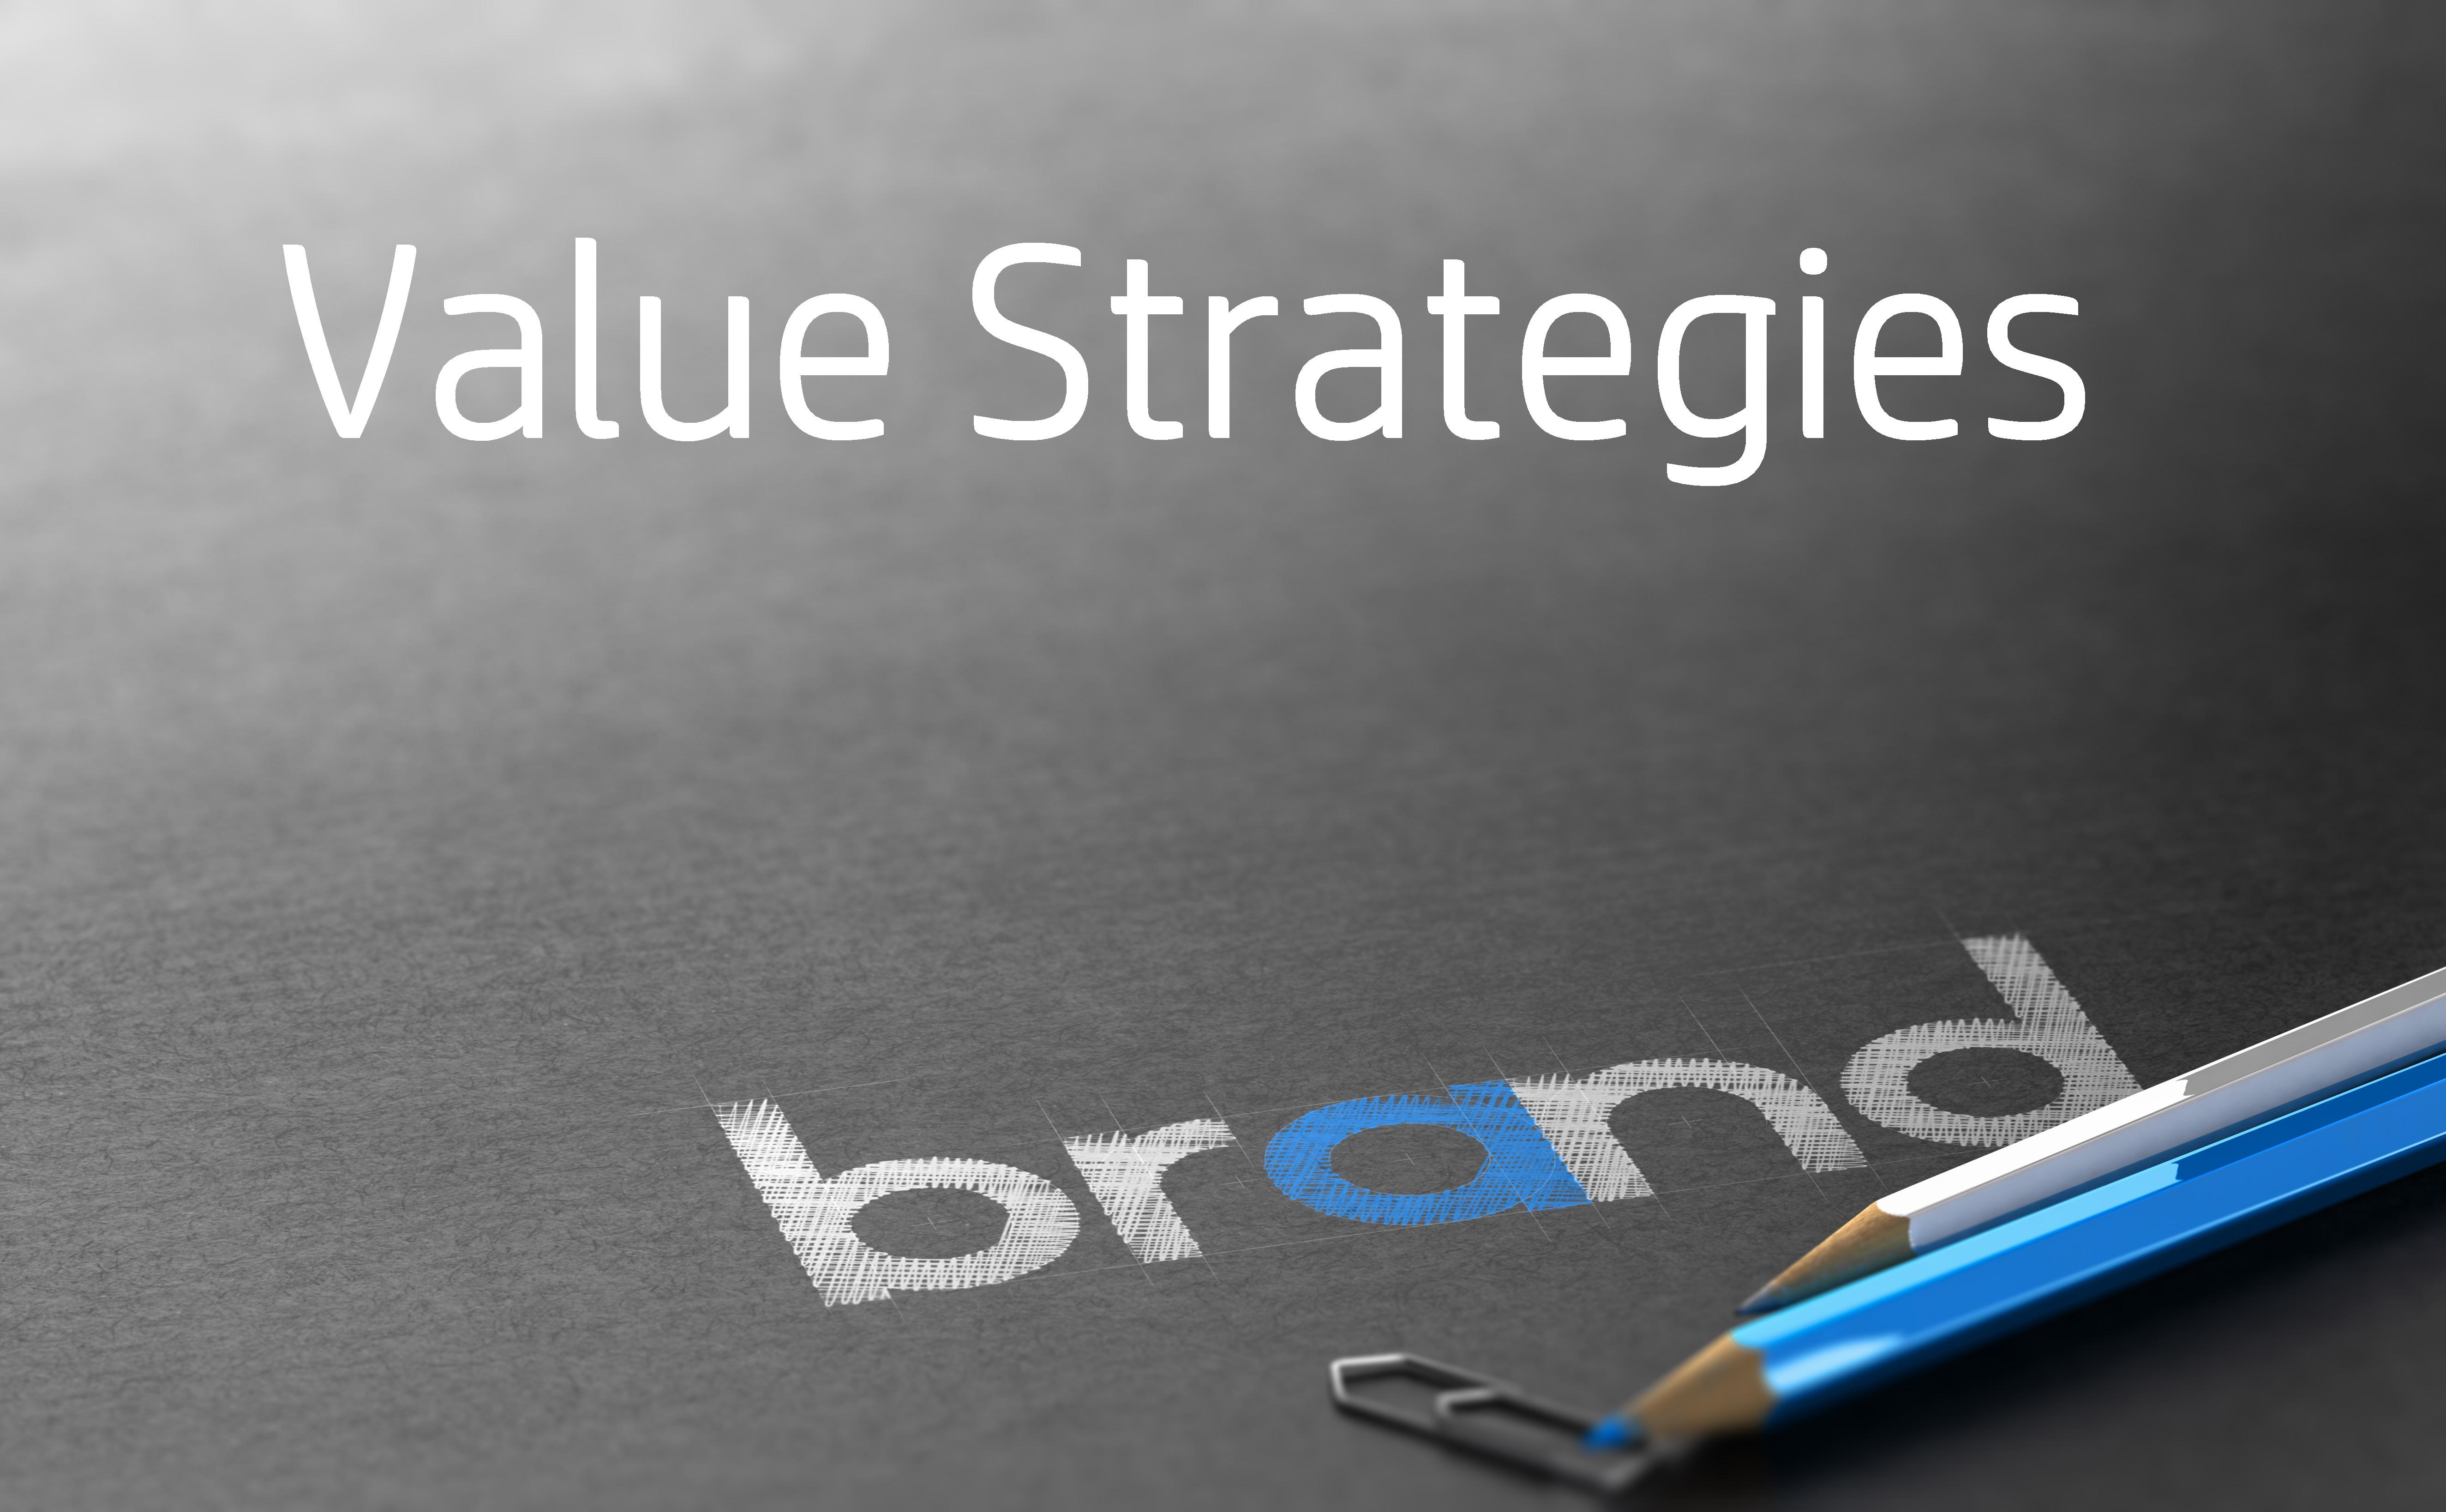 Added Value Strategies to Lead Brand Growth - Free 3 Hour CE - Duluth